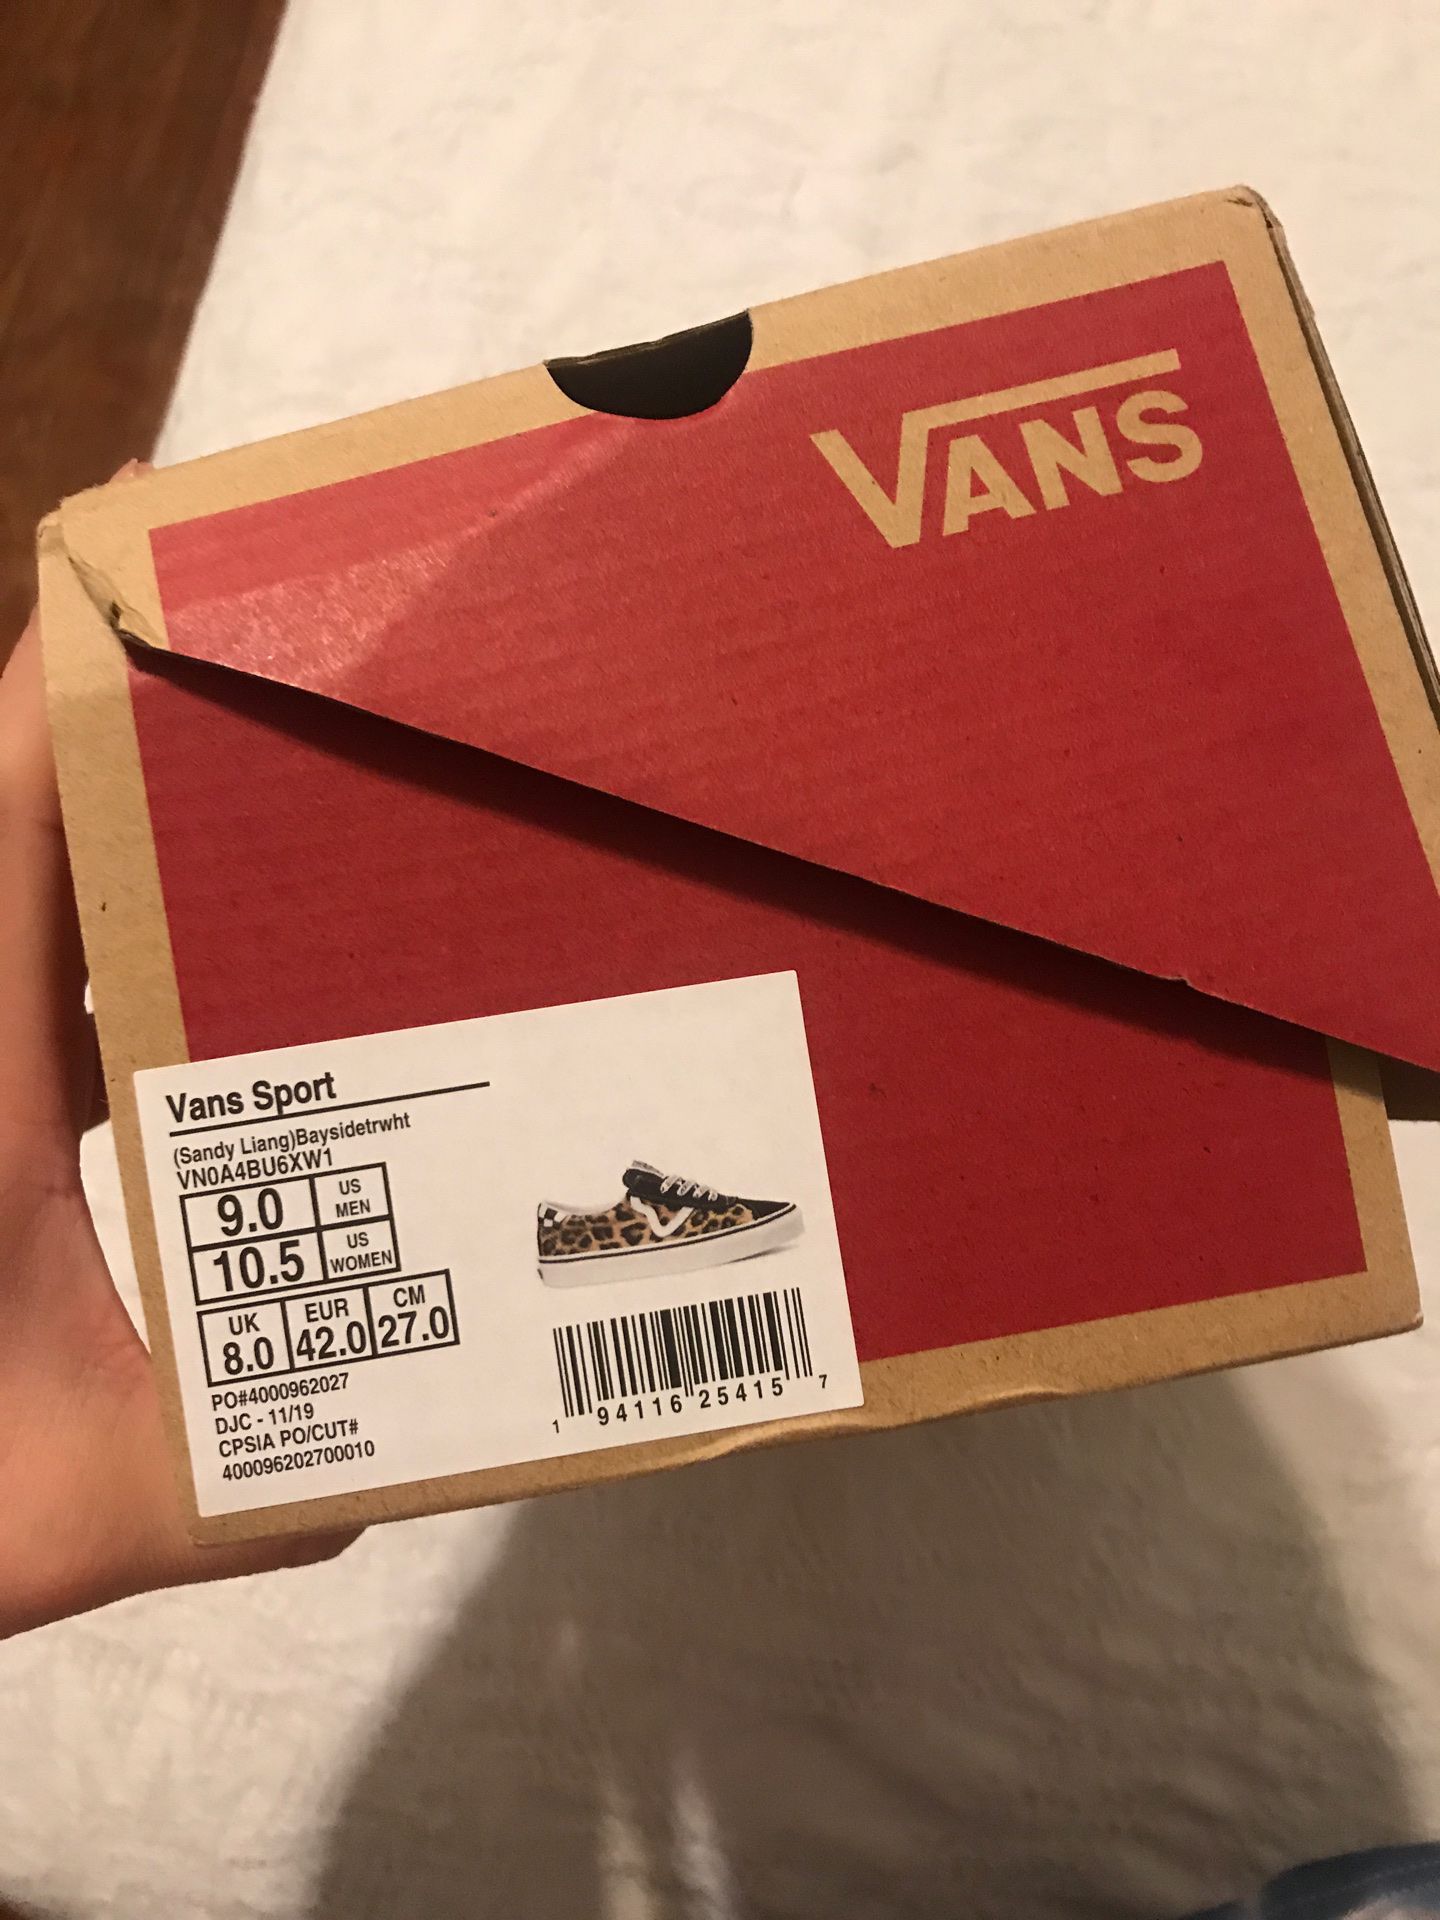 Vans x Sandy Liang limited edition collab